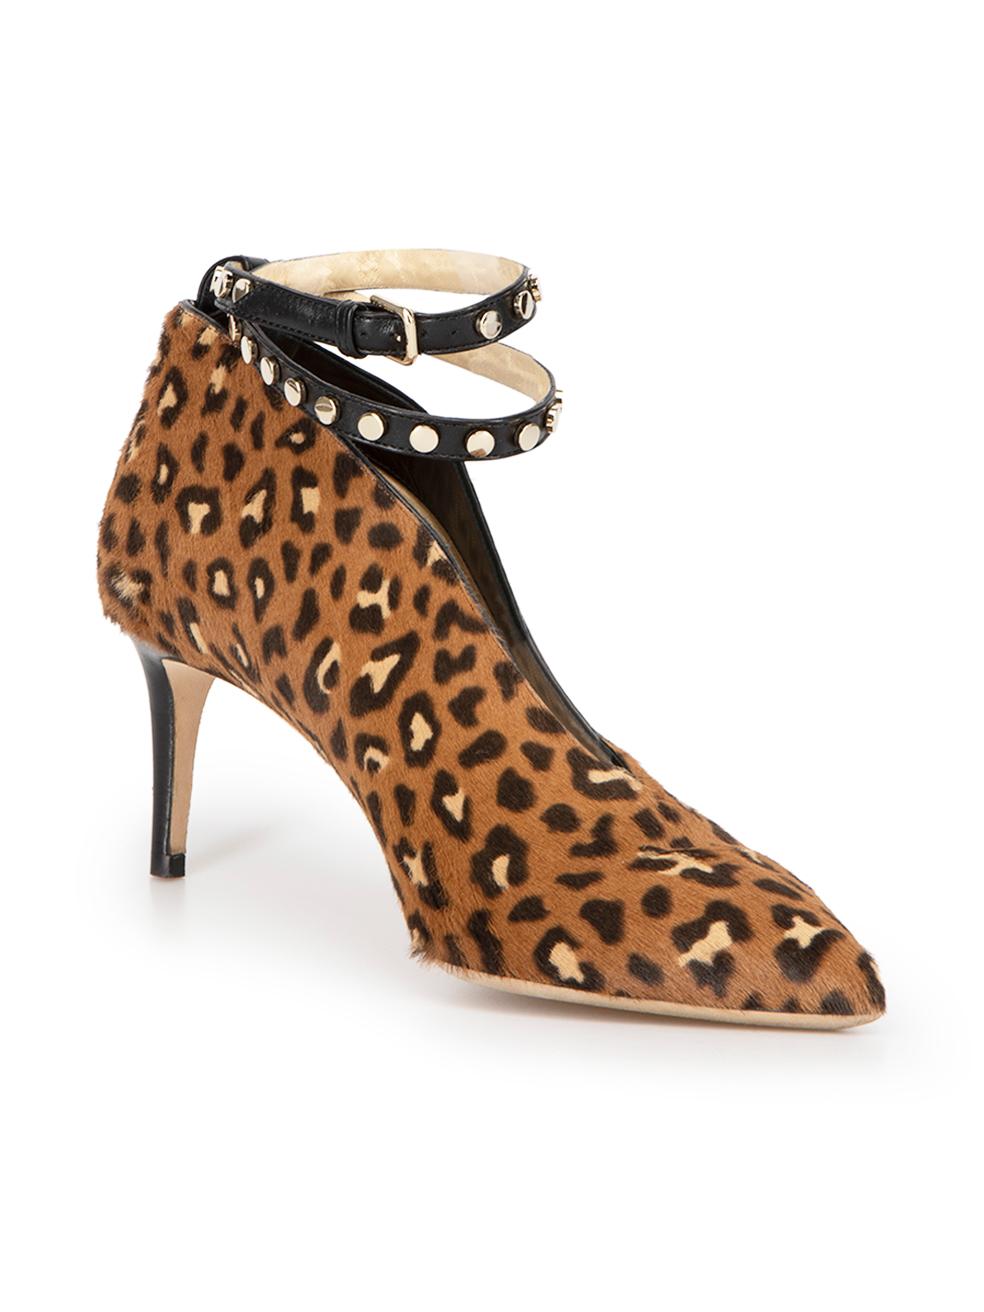 CONDITION is Very good. Minimal wear to shoes is evident. Minimal wear to the soles of both shoes and a scuff mark can be seen on heel stem on this used Jimmy Choo designer resale item.




Details


Brown

Pony hair calfskin

Leopard pattern